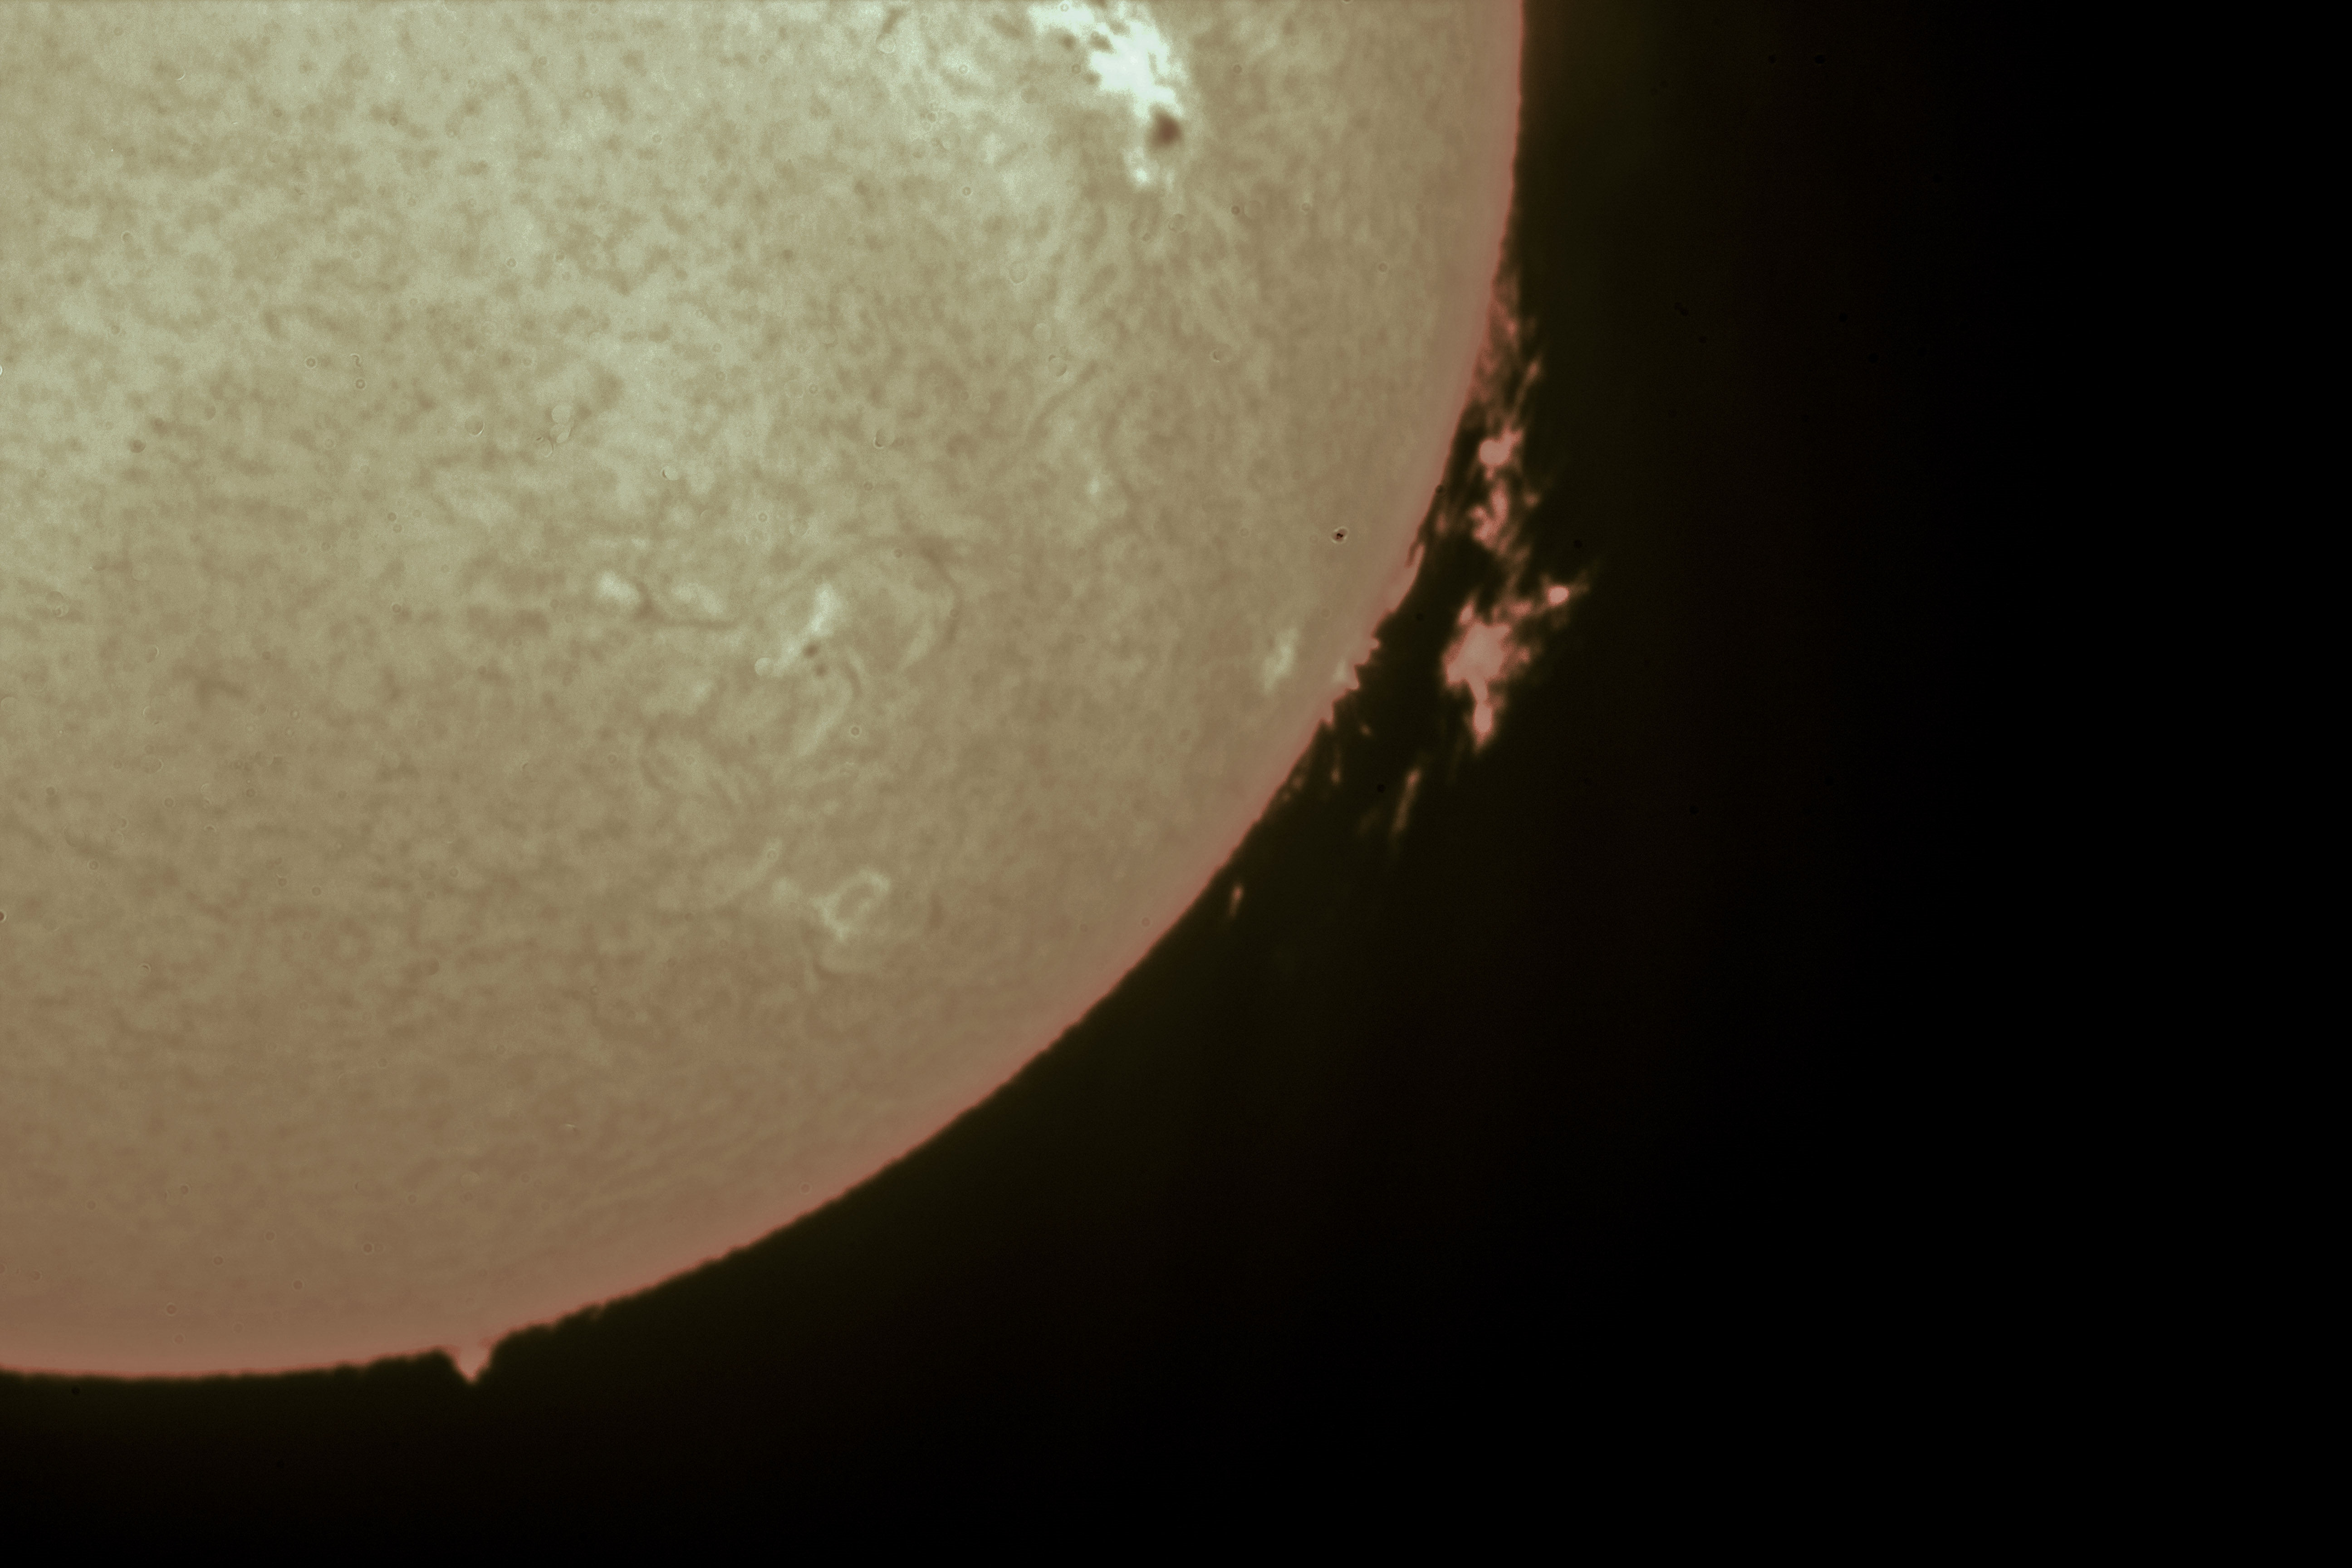 Prominence by Tony Hayes.  29/09/15 12.41pm.  Canon EOS1200d, 1/2 second  ISO-100.  Taken through Lunt 35MM H-A Telescope. with two 2X Barlows atached. Photoshop to adjust brightness, contrast and colour filters.